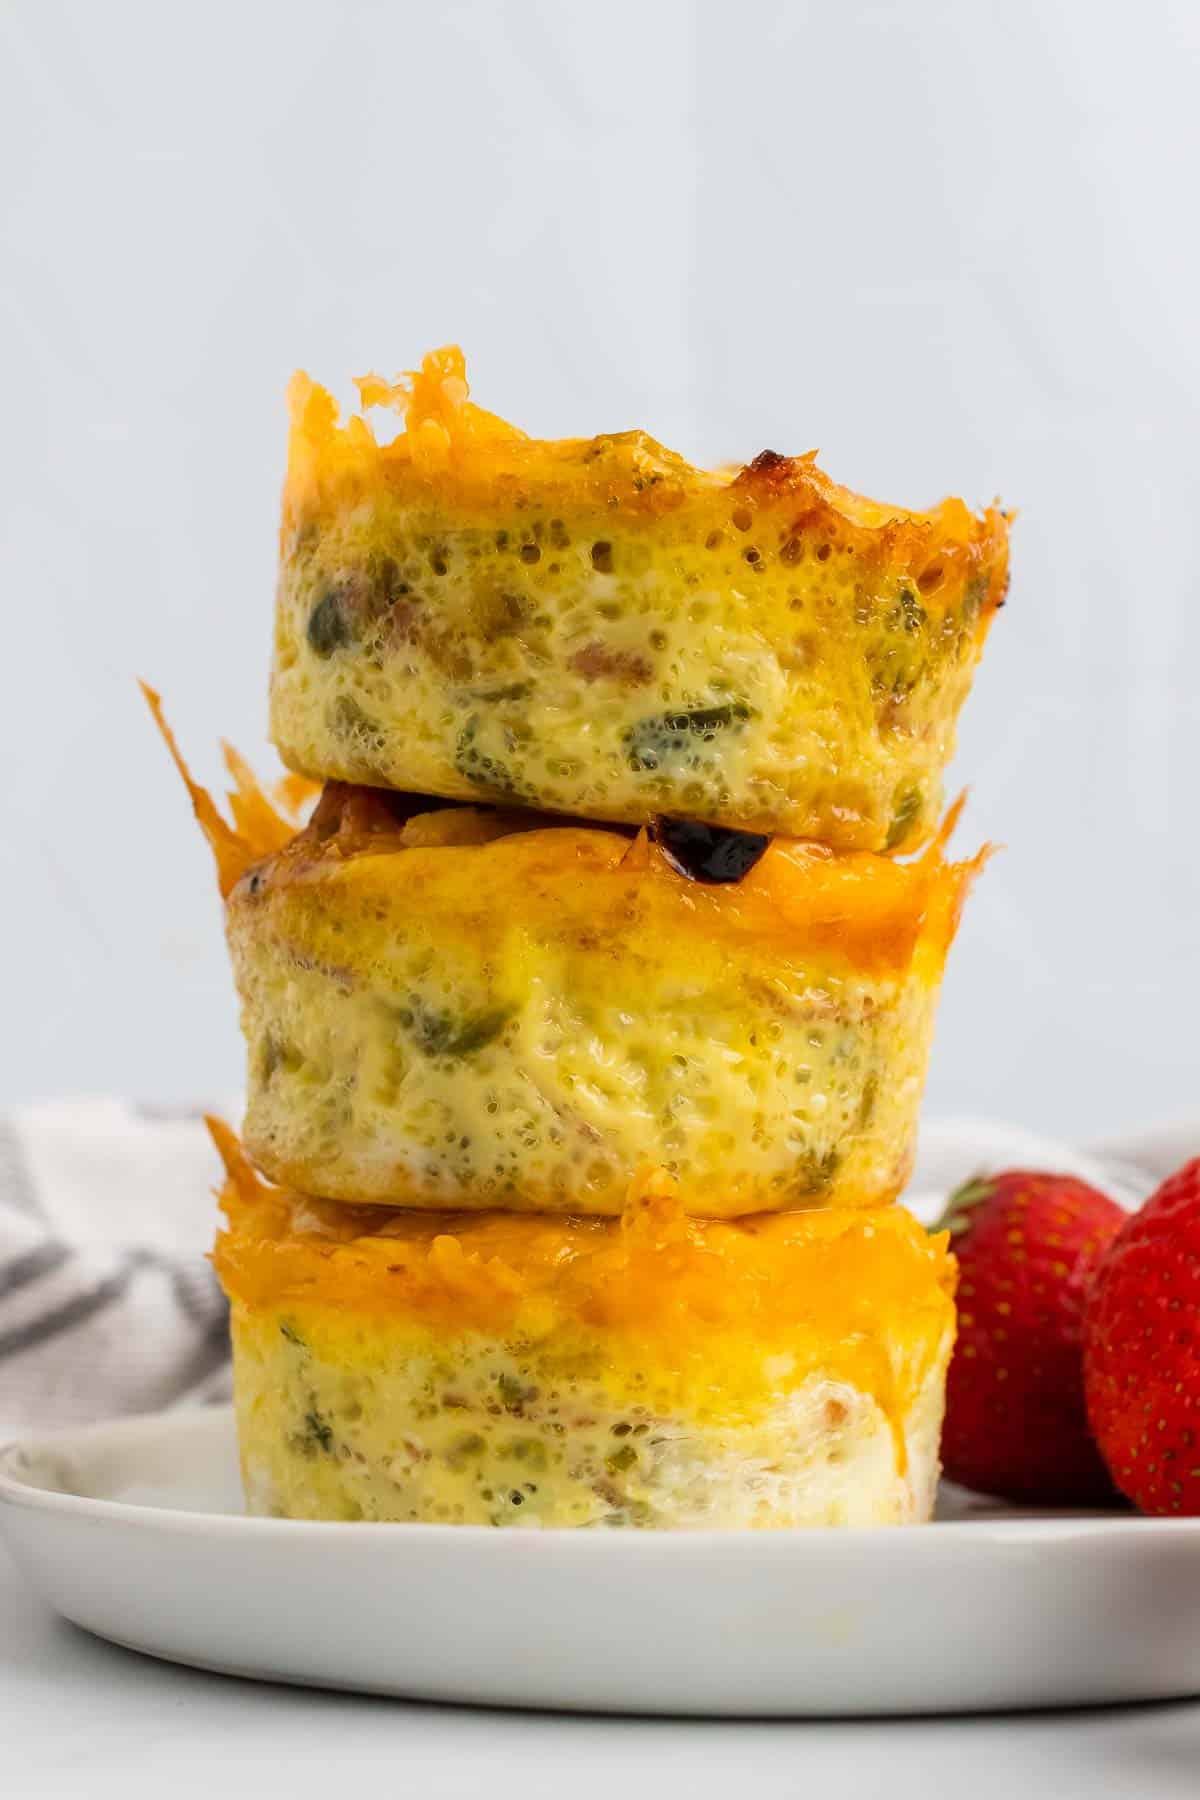 Stack of three egg muffins seen from the side